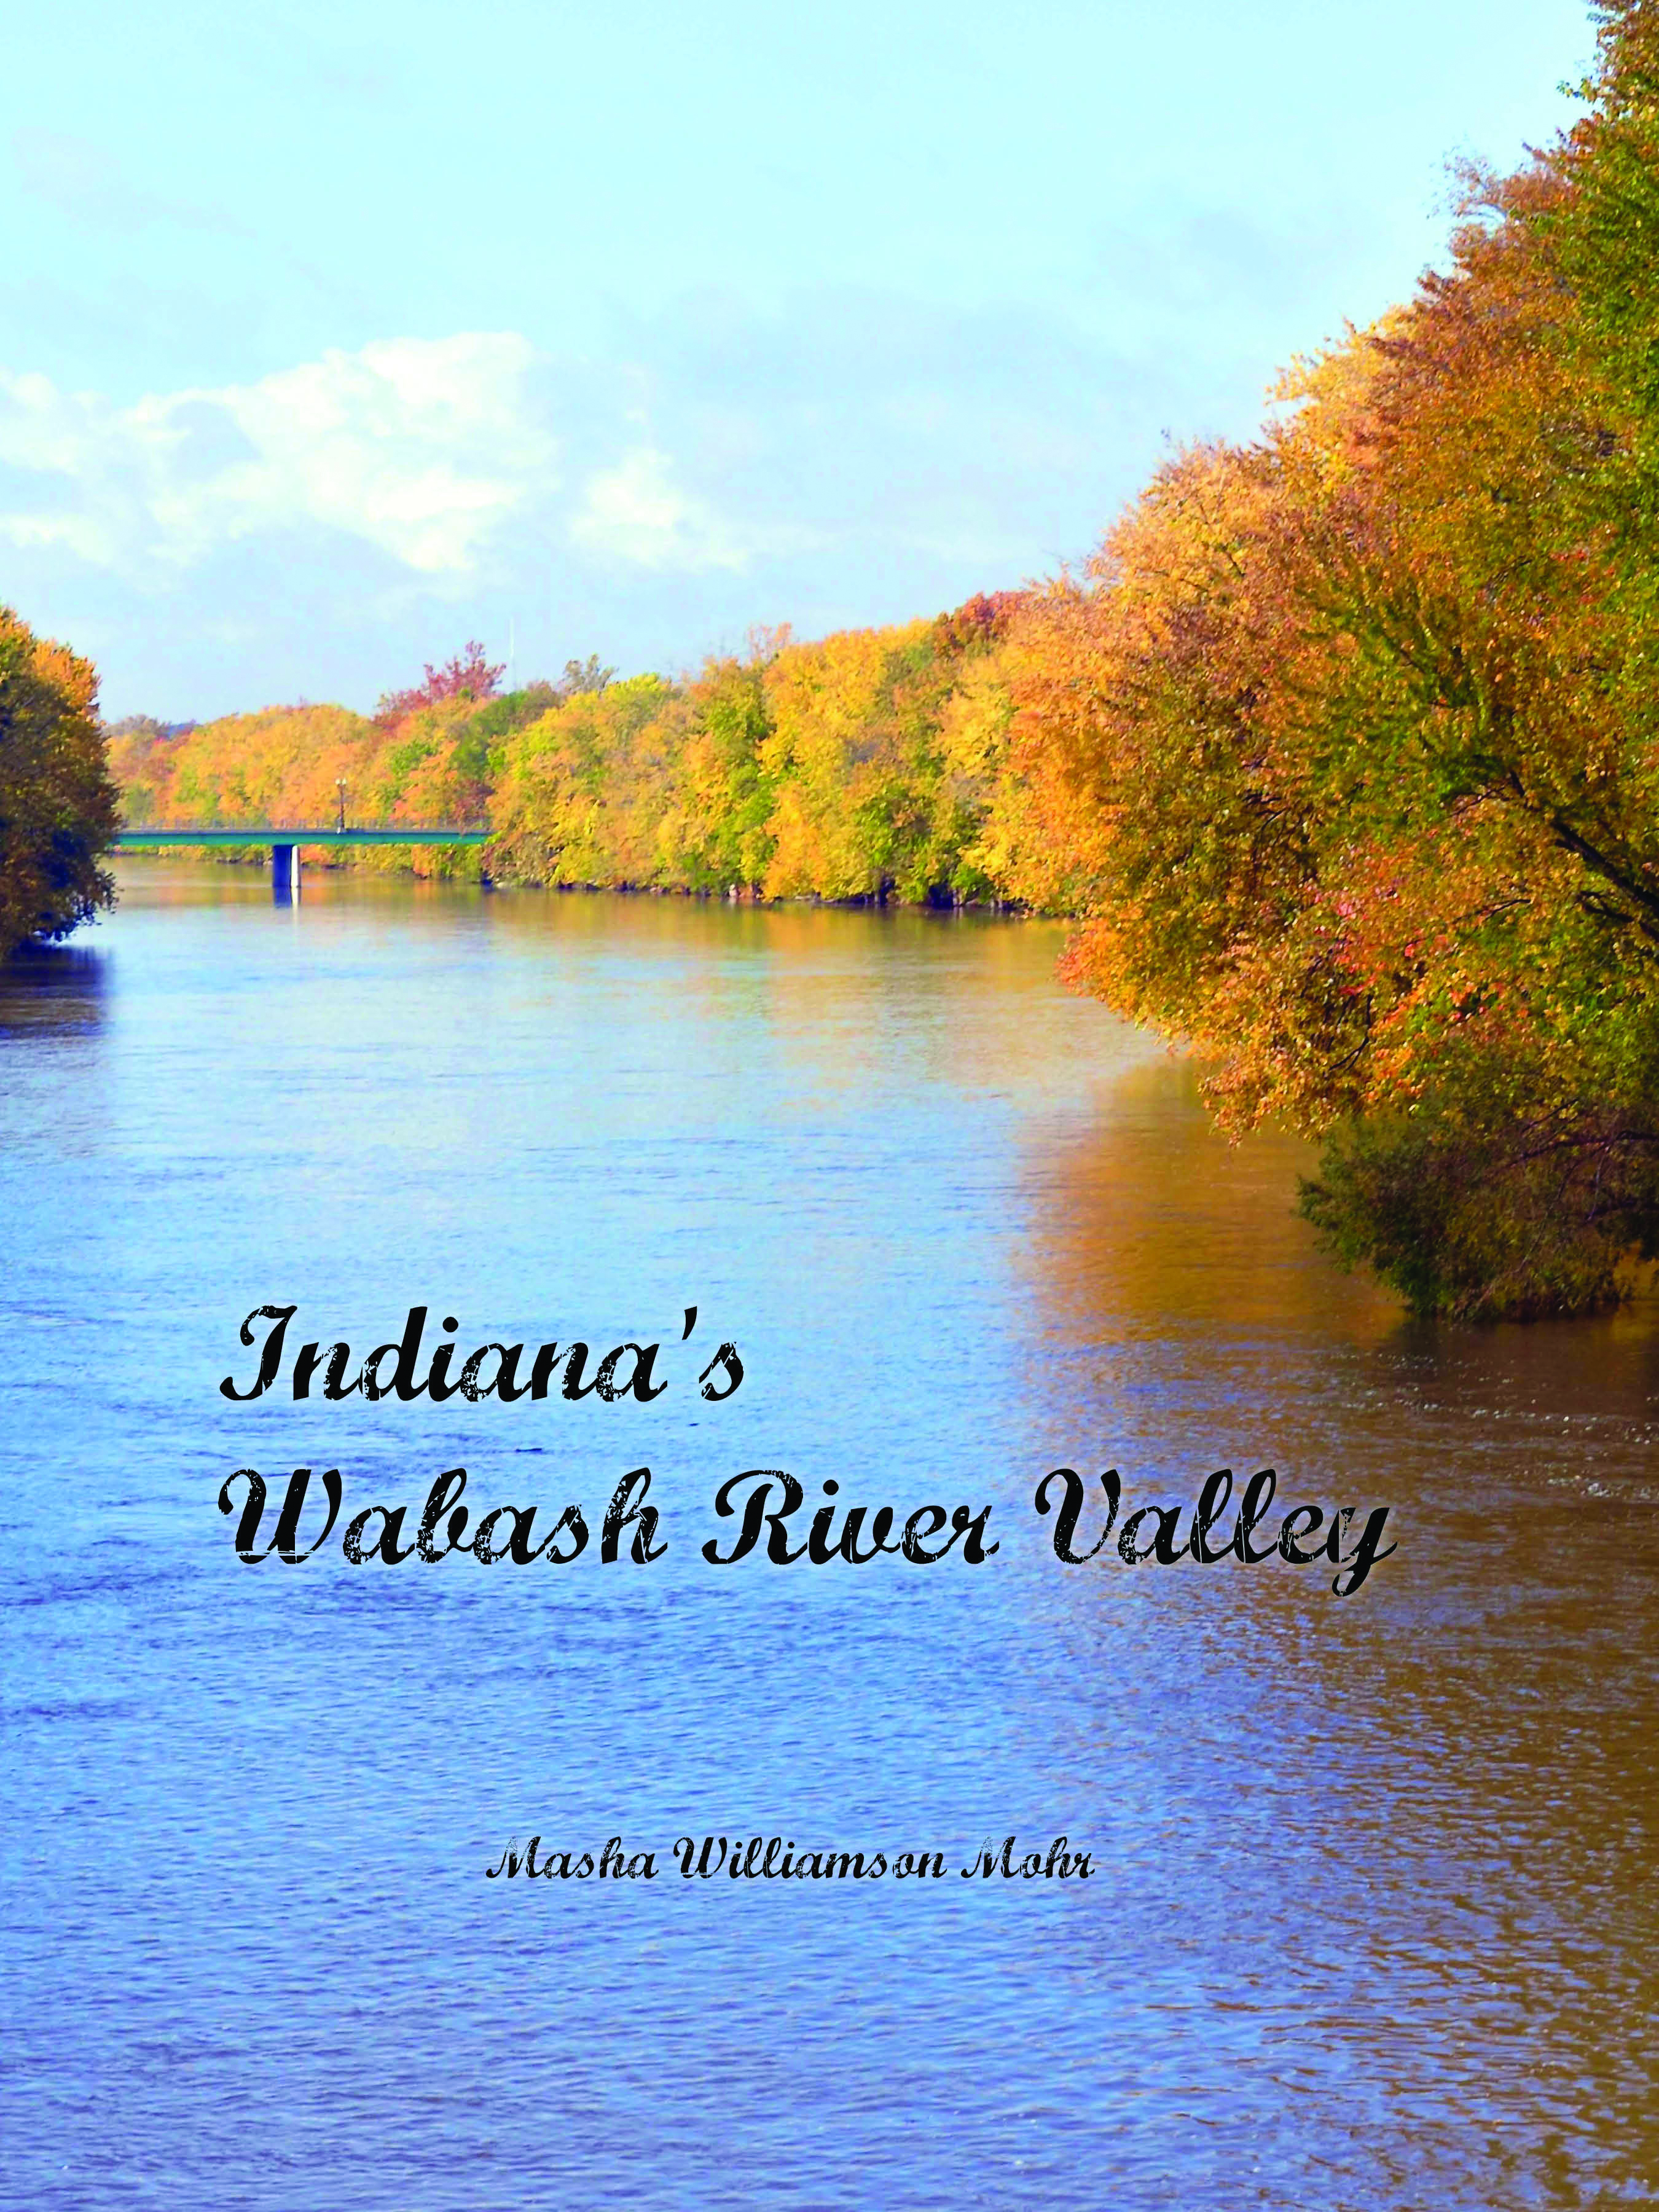 indiana's wasbash river valley